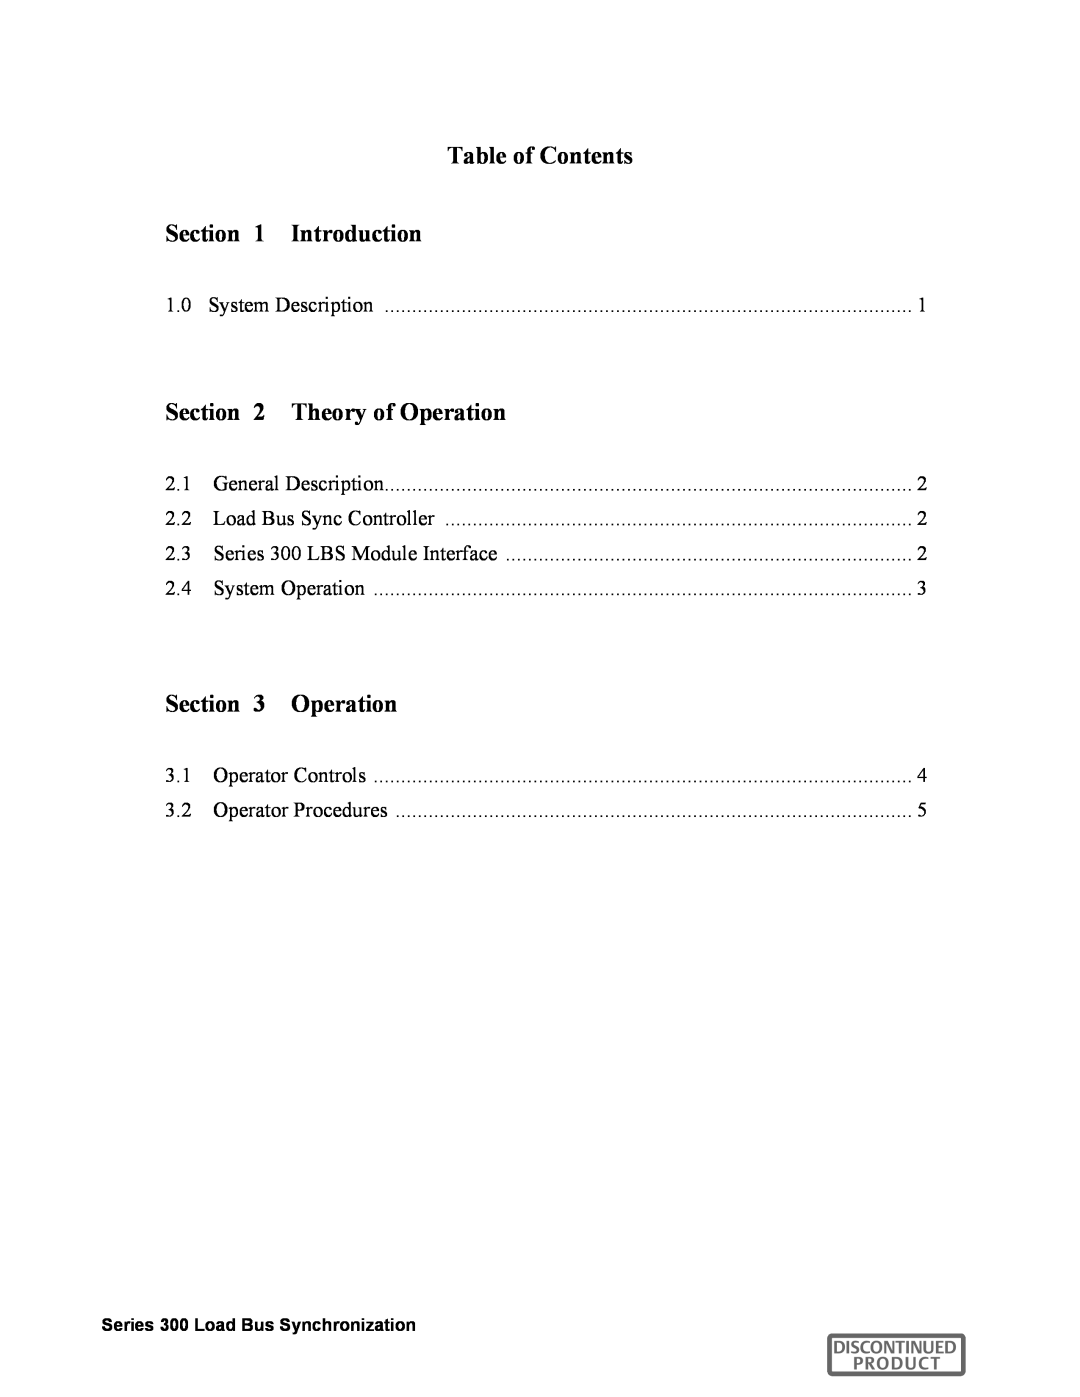 Liebert 300 manual Table of Contents Introduction, Theory of Operation 